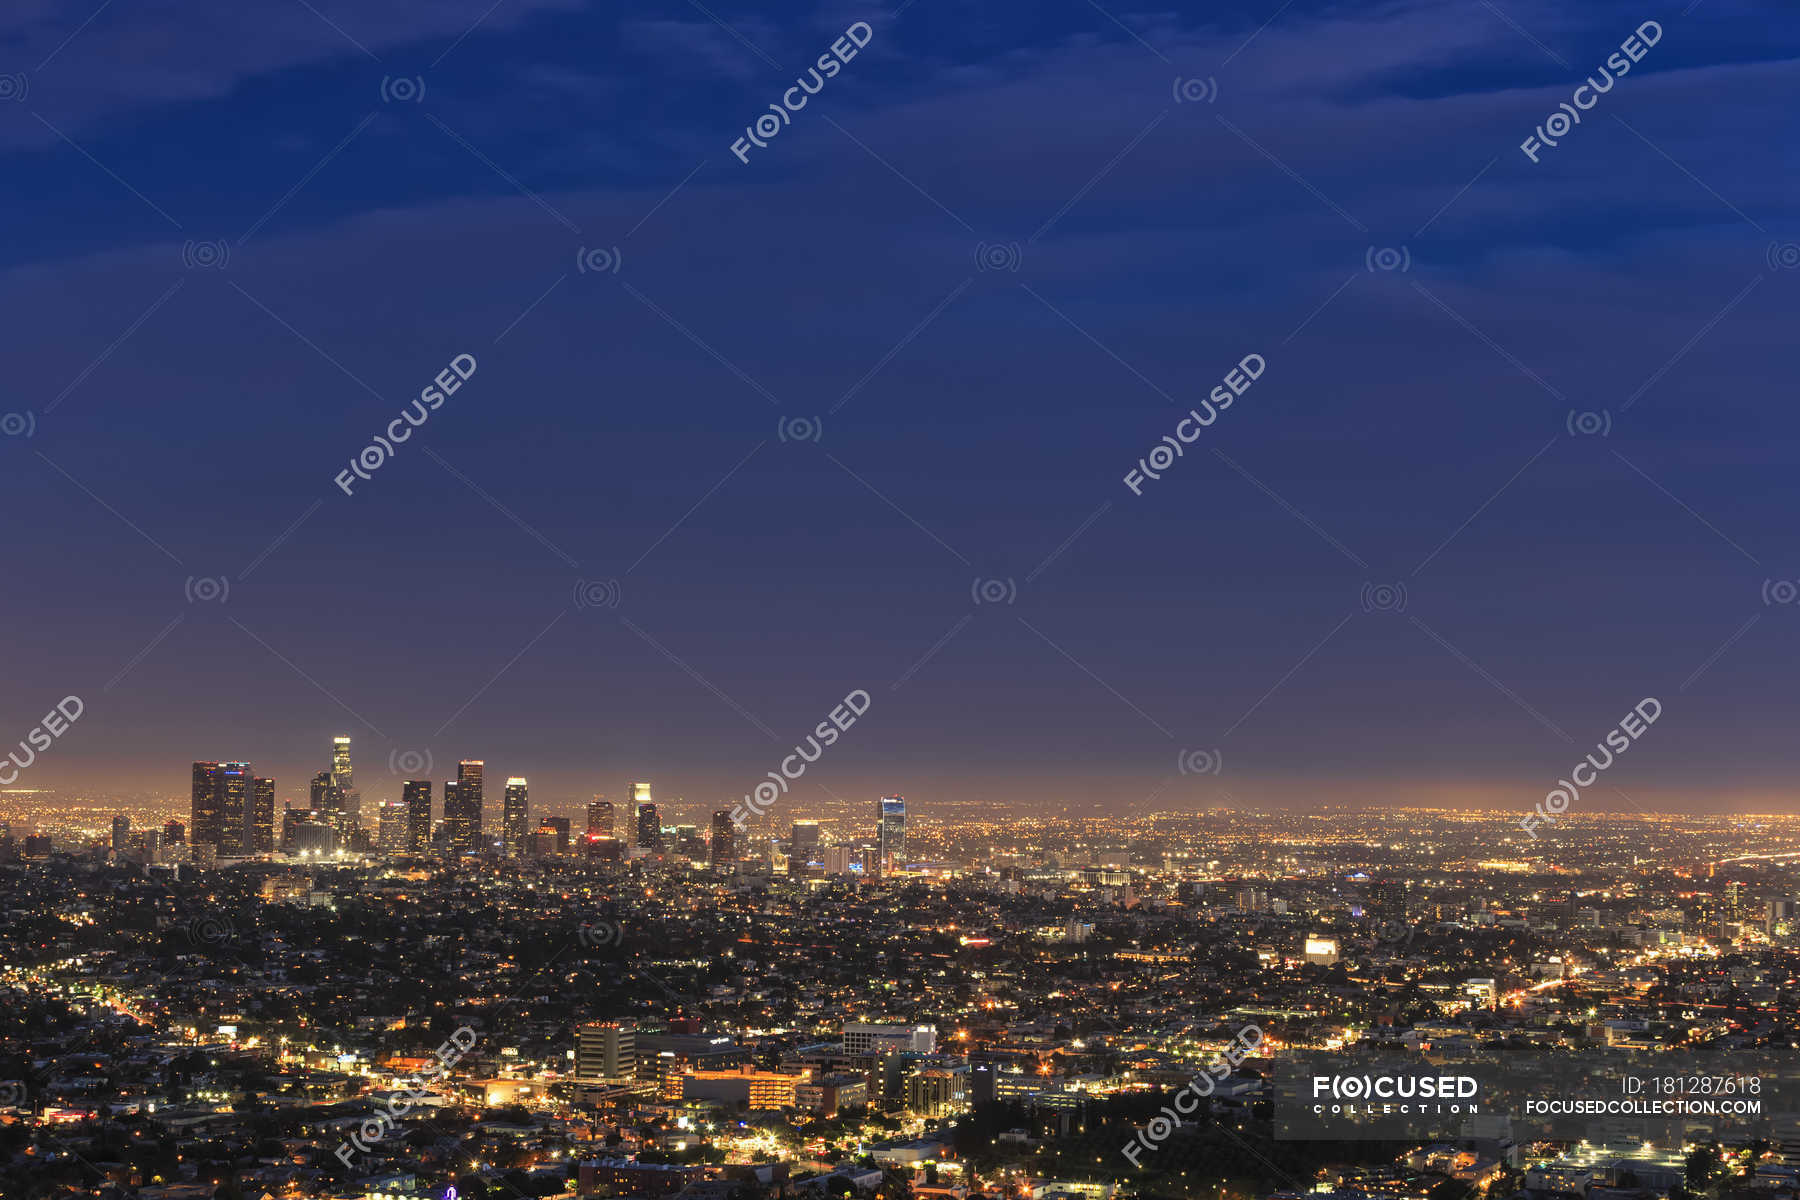 Distant view of skyline in evening at Los Angeles, California, USA